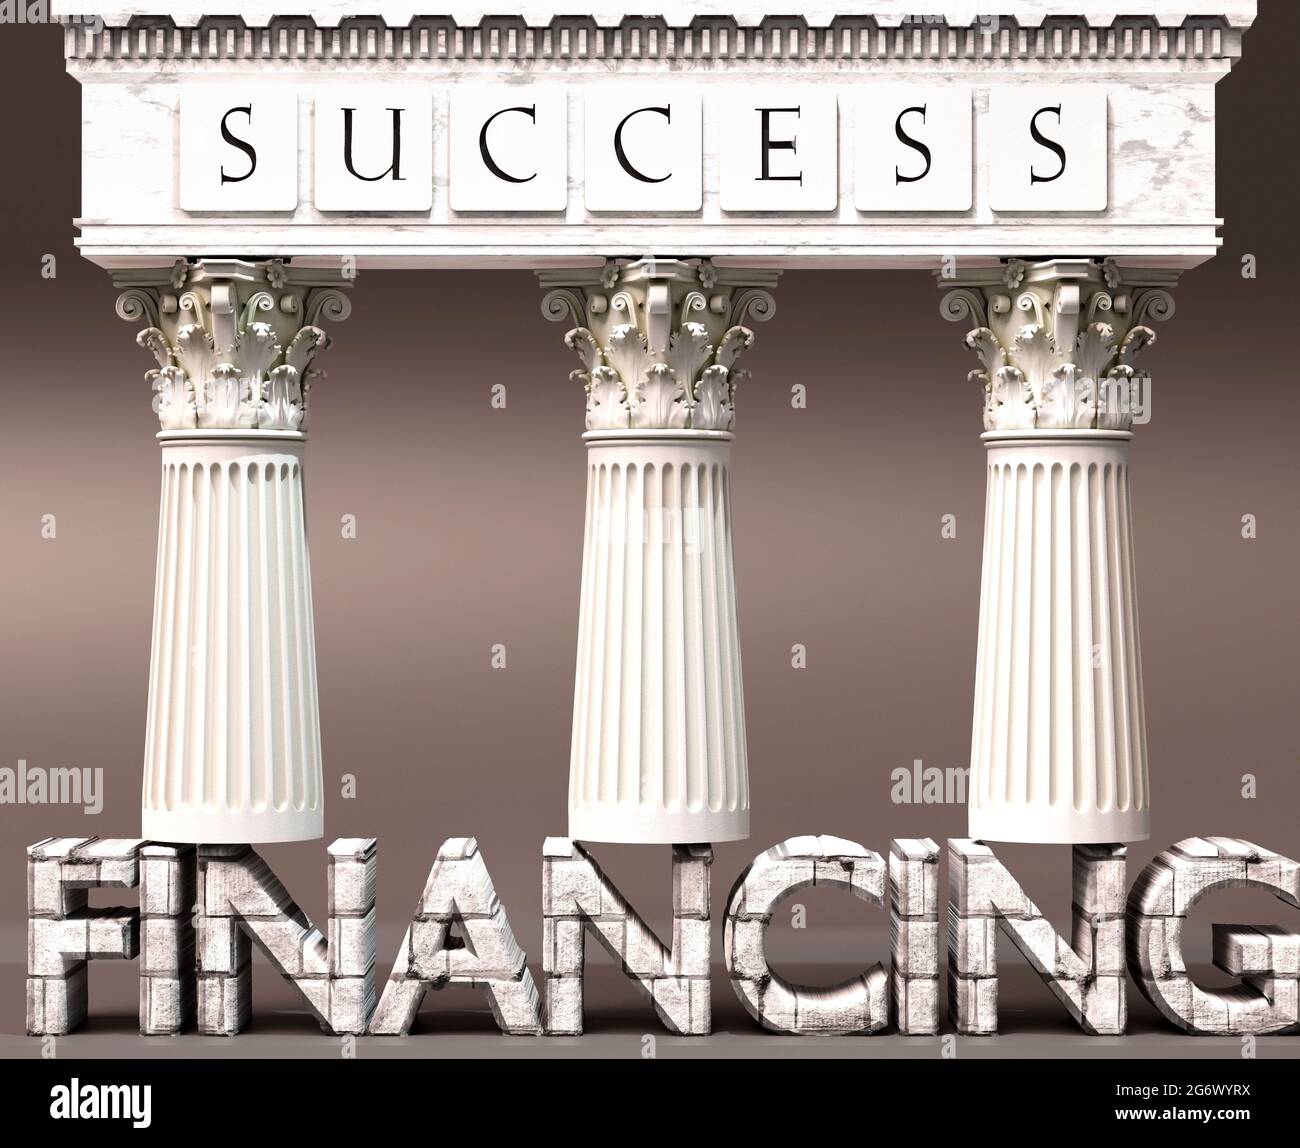 Financing as a foundation of success - symbolized by pillars of success supported by Financing to show that it is essential for reaching goals and ach Stock Photo